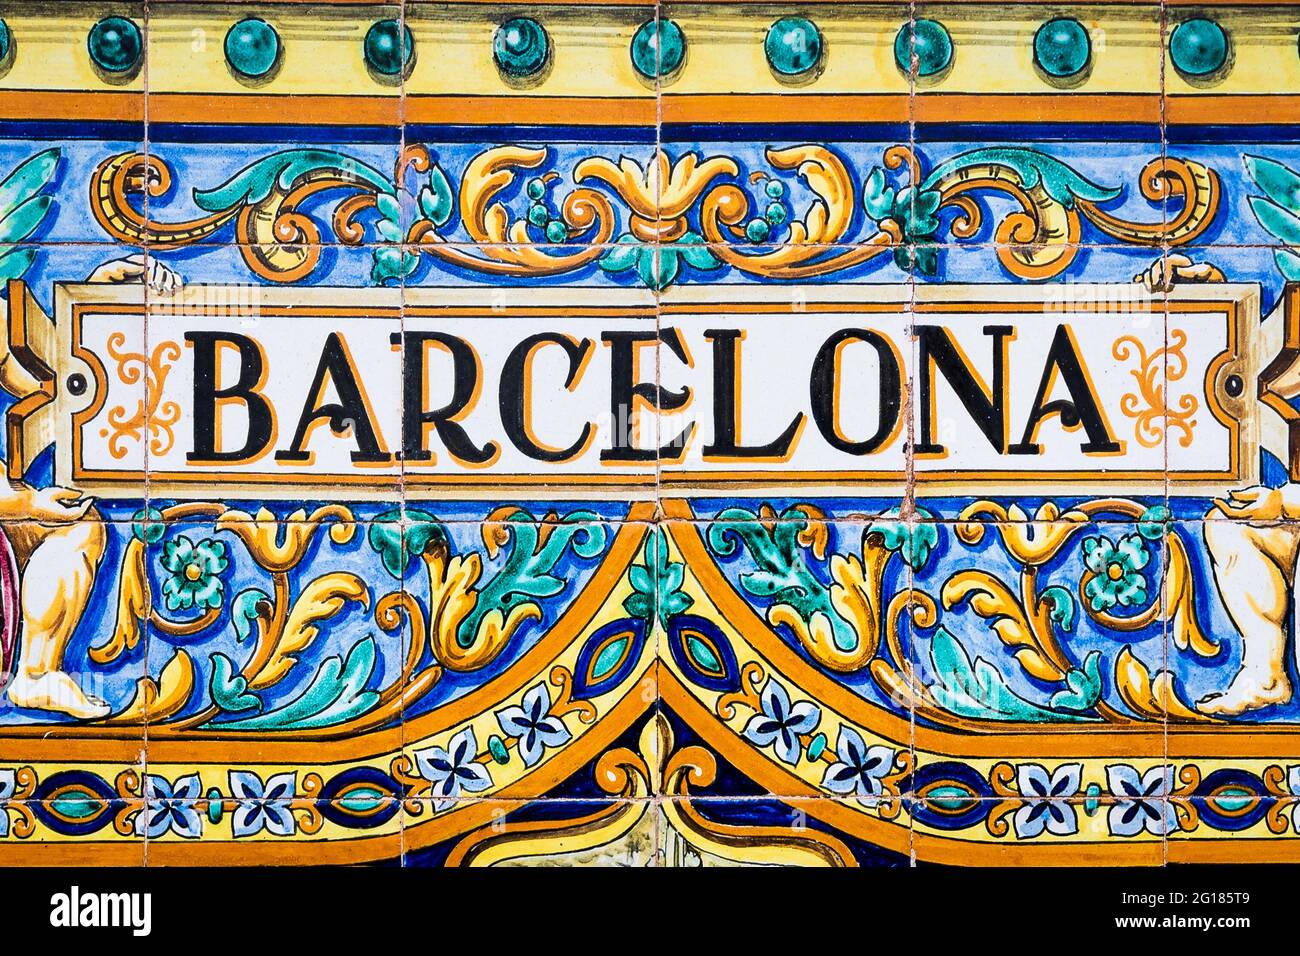 Barcelona sign on a mosaic wall Stock Photo